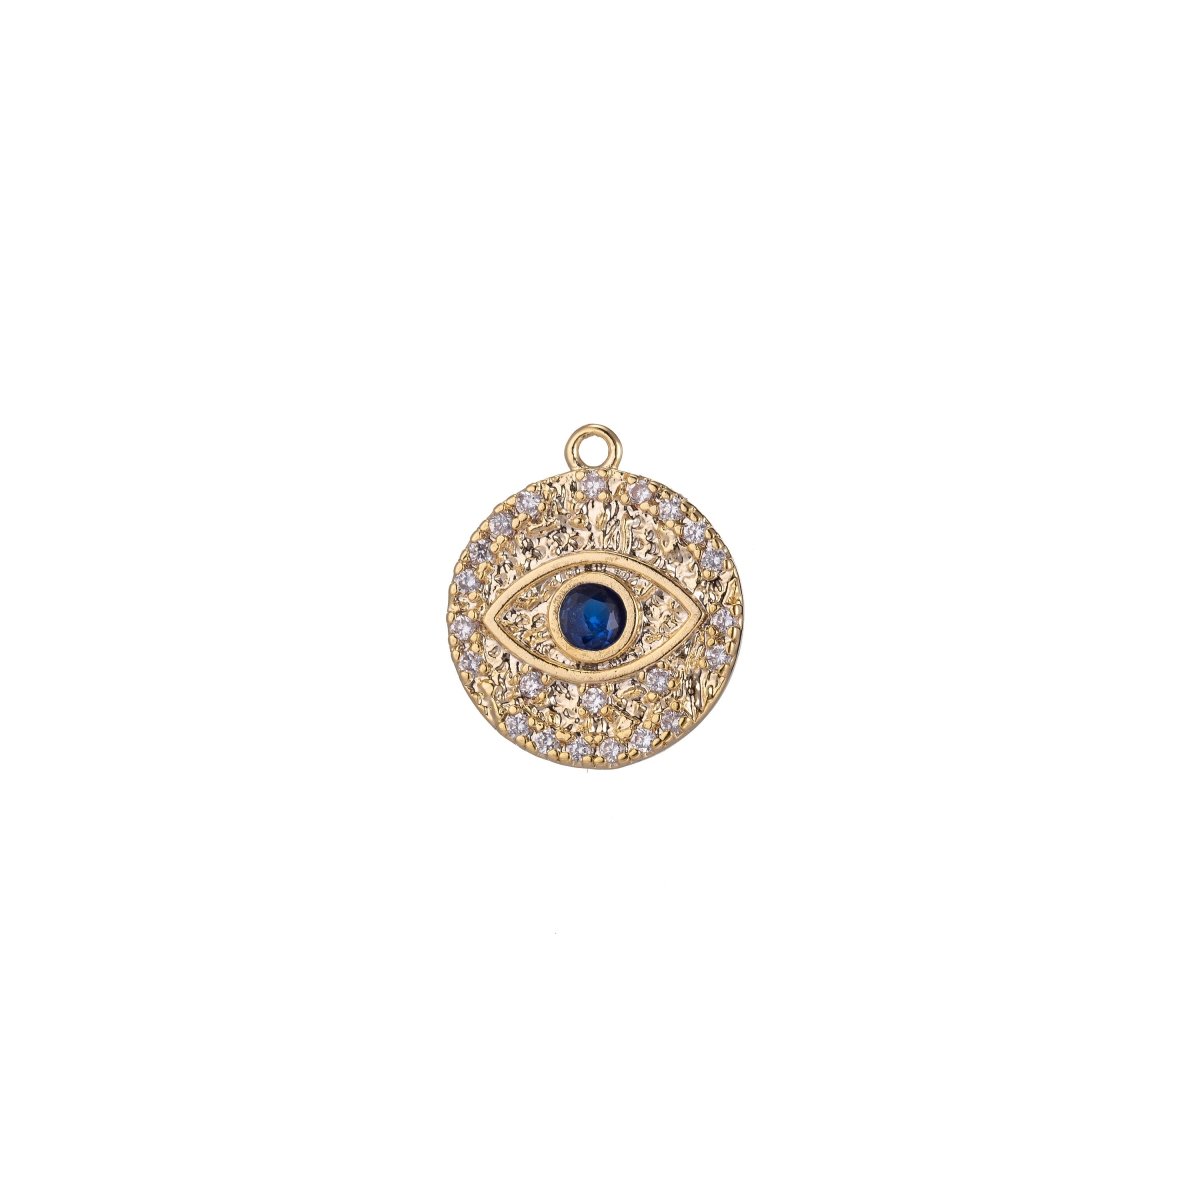 OS Golden Blue Evil Eye Charm, Micro Pave CZ Charm, Dainty Pendant Spiritual Protection Talisman Necklace Charm for Jewelry Making E-410 - DLUXCA